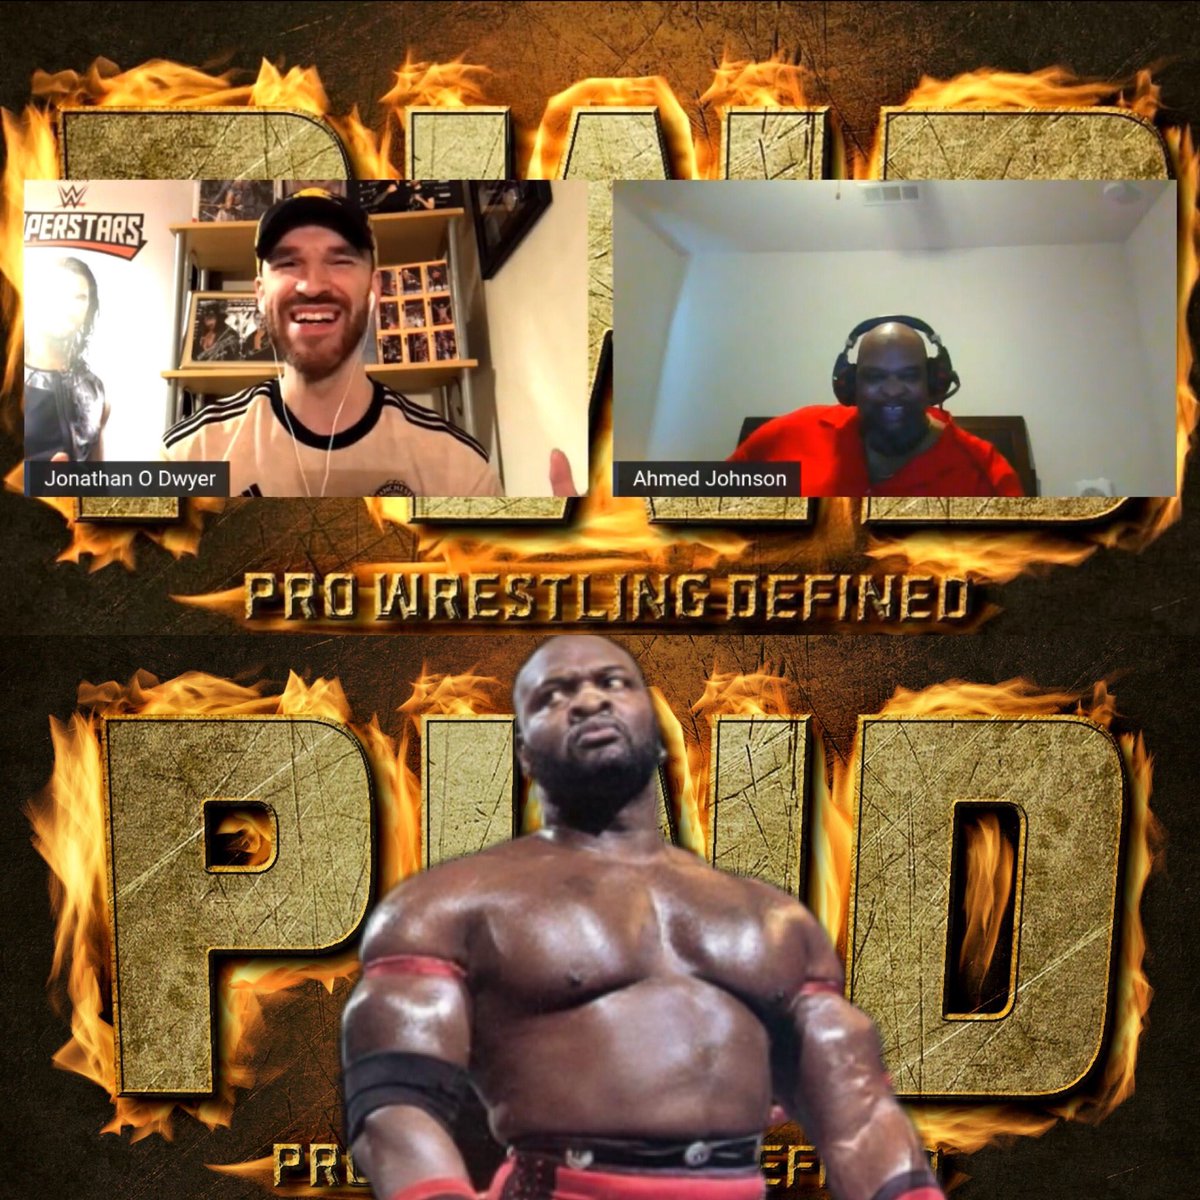 My interview with WWE Legend Ahmed Johnson is now available on YouTube youtu.be/5xKjdp5aSGM and Apple Podcasts podcasts.apple.com/ie/podcast/pro… please give the video a thumbs up and subscribe to the YouTube channel and hit subscribe on Apple Podcasts. #AhmedJohnson #ProWrestlingDefined